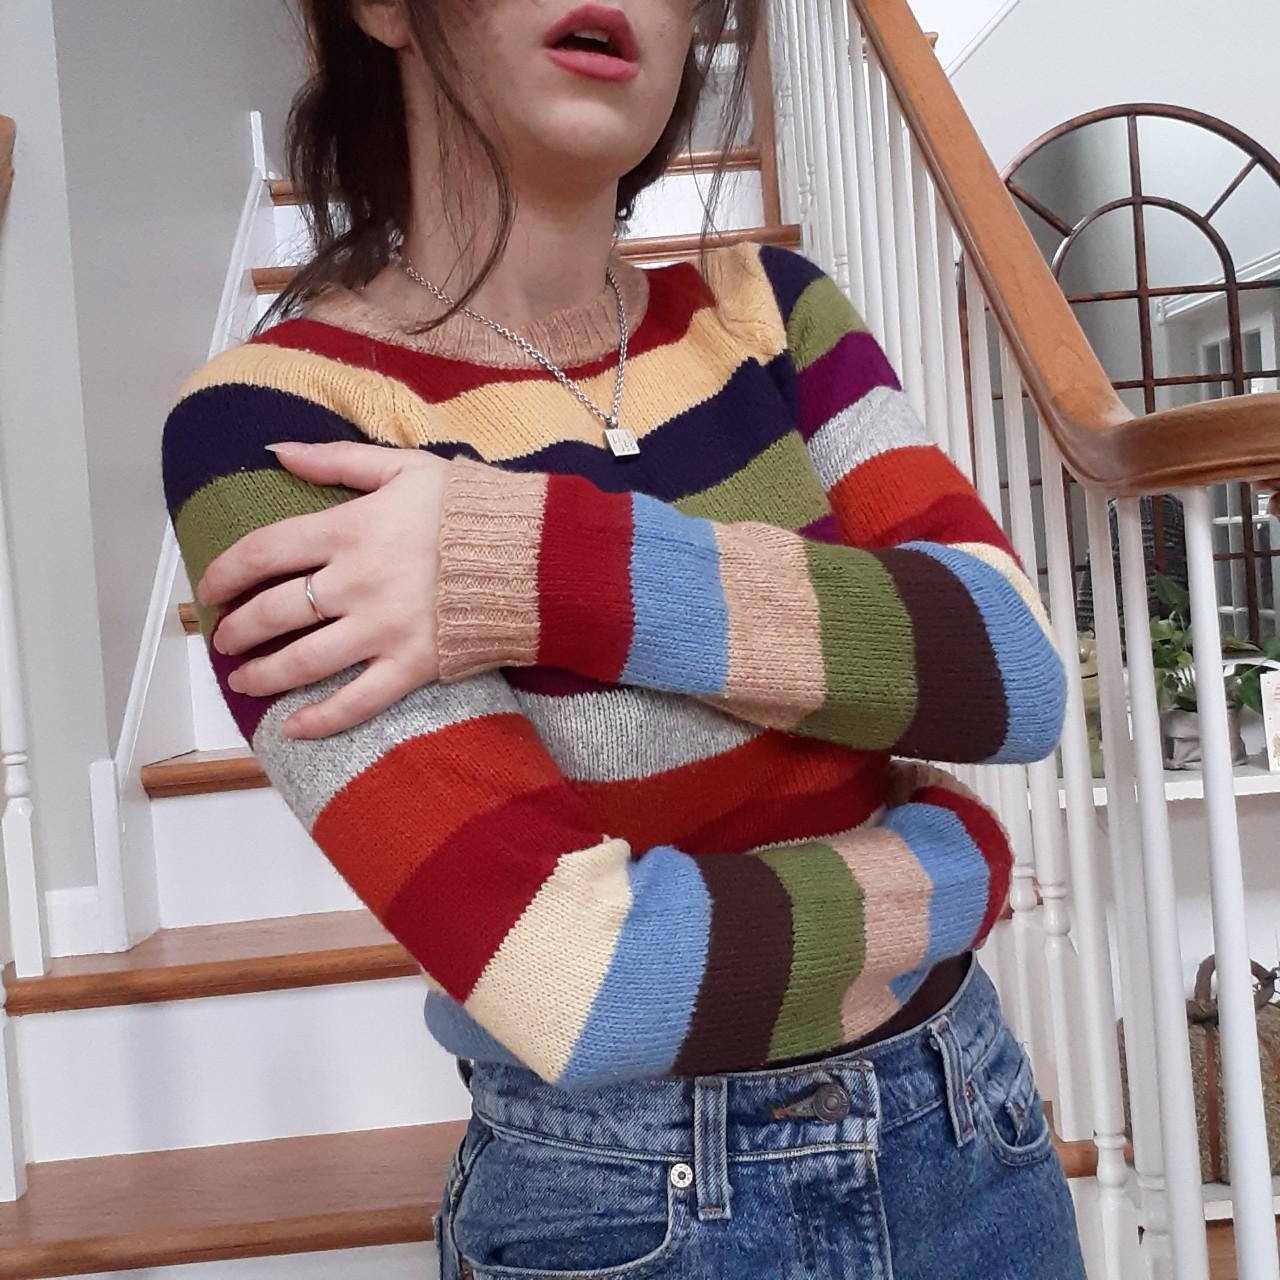 Product Image 1 - Colorful stripe sweater 
This sweater